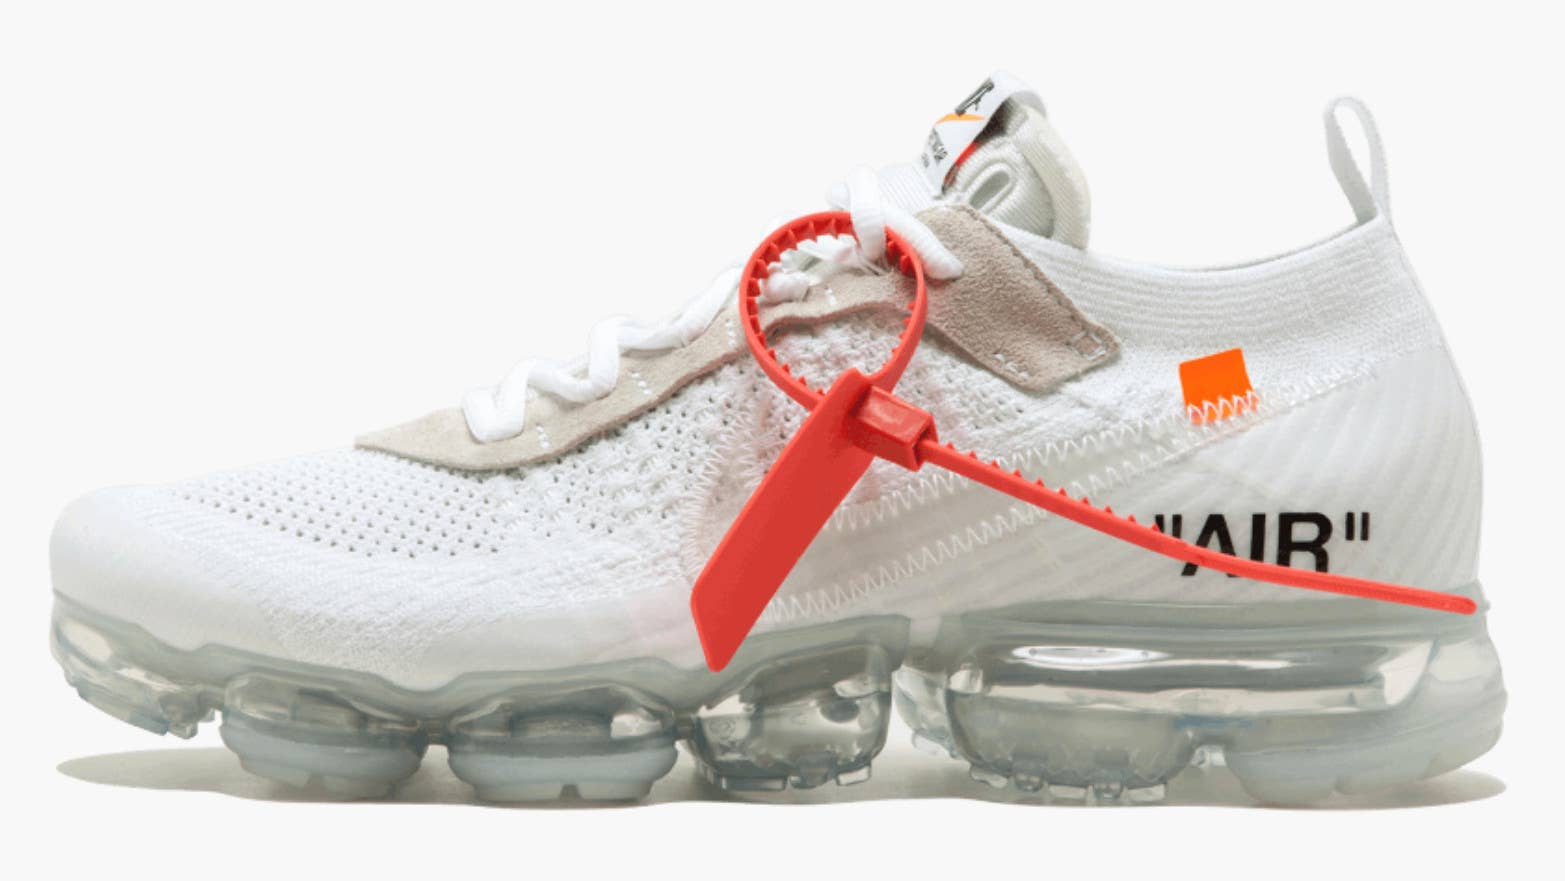 Virgl Abloh's New Off-White x VaporMax Drops This Weekend